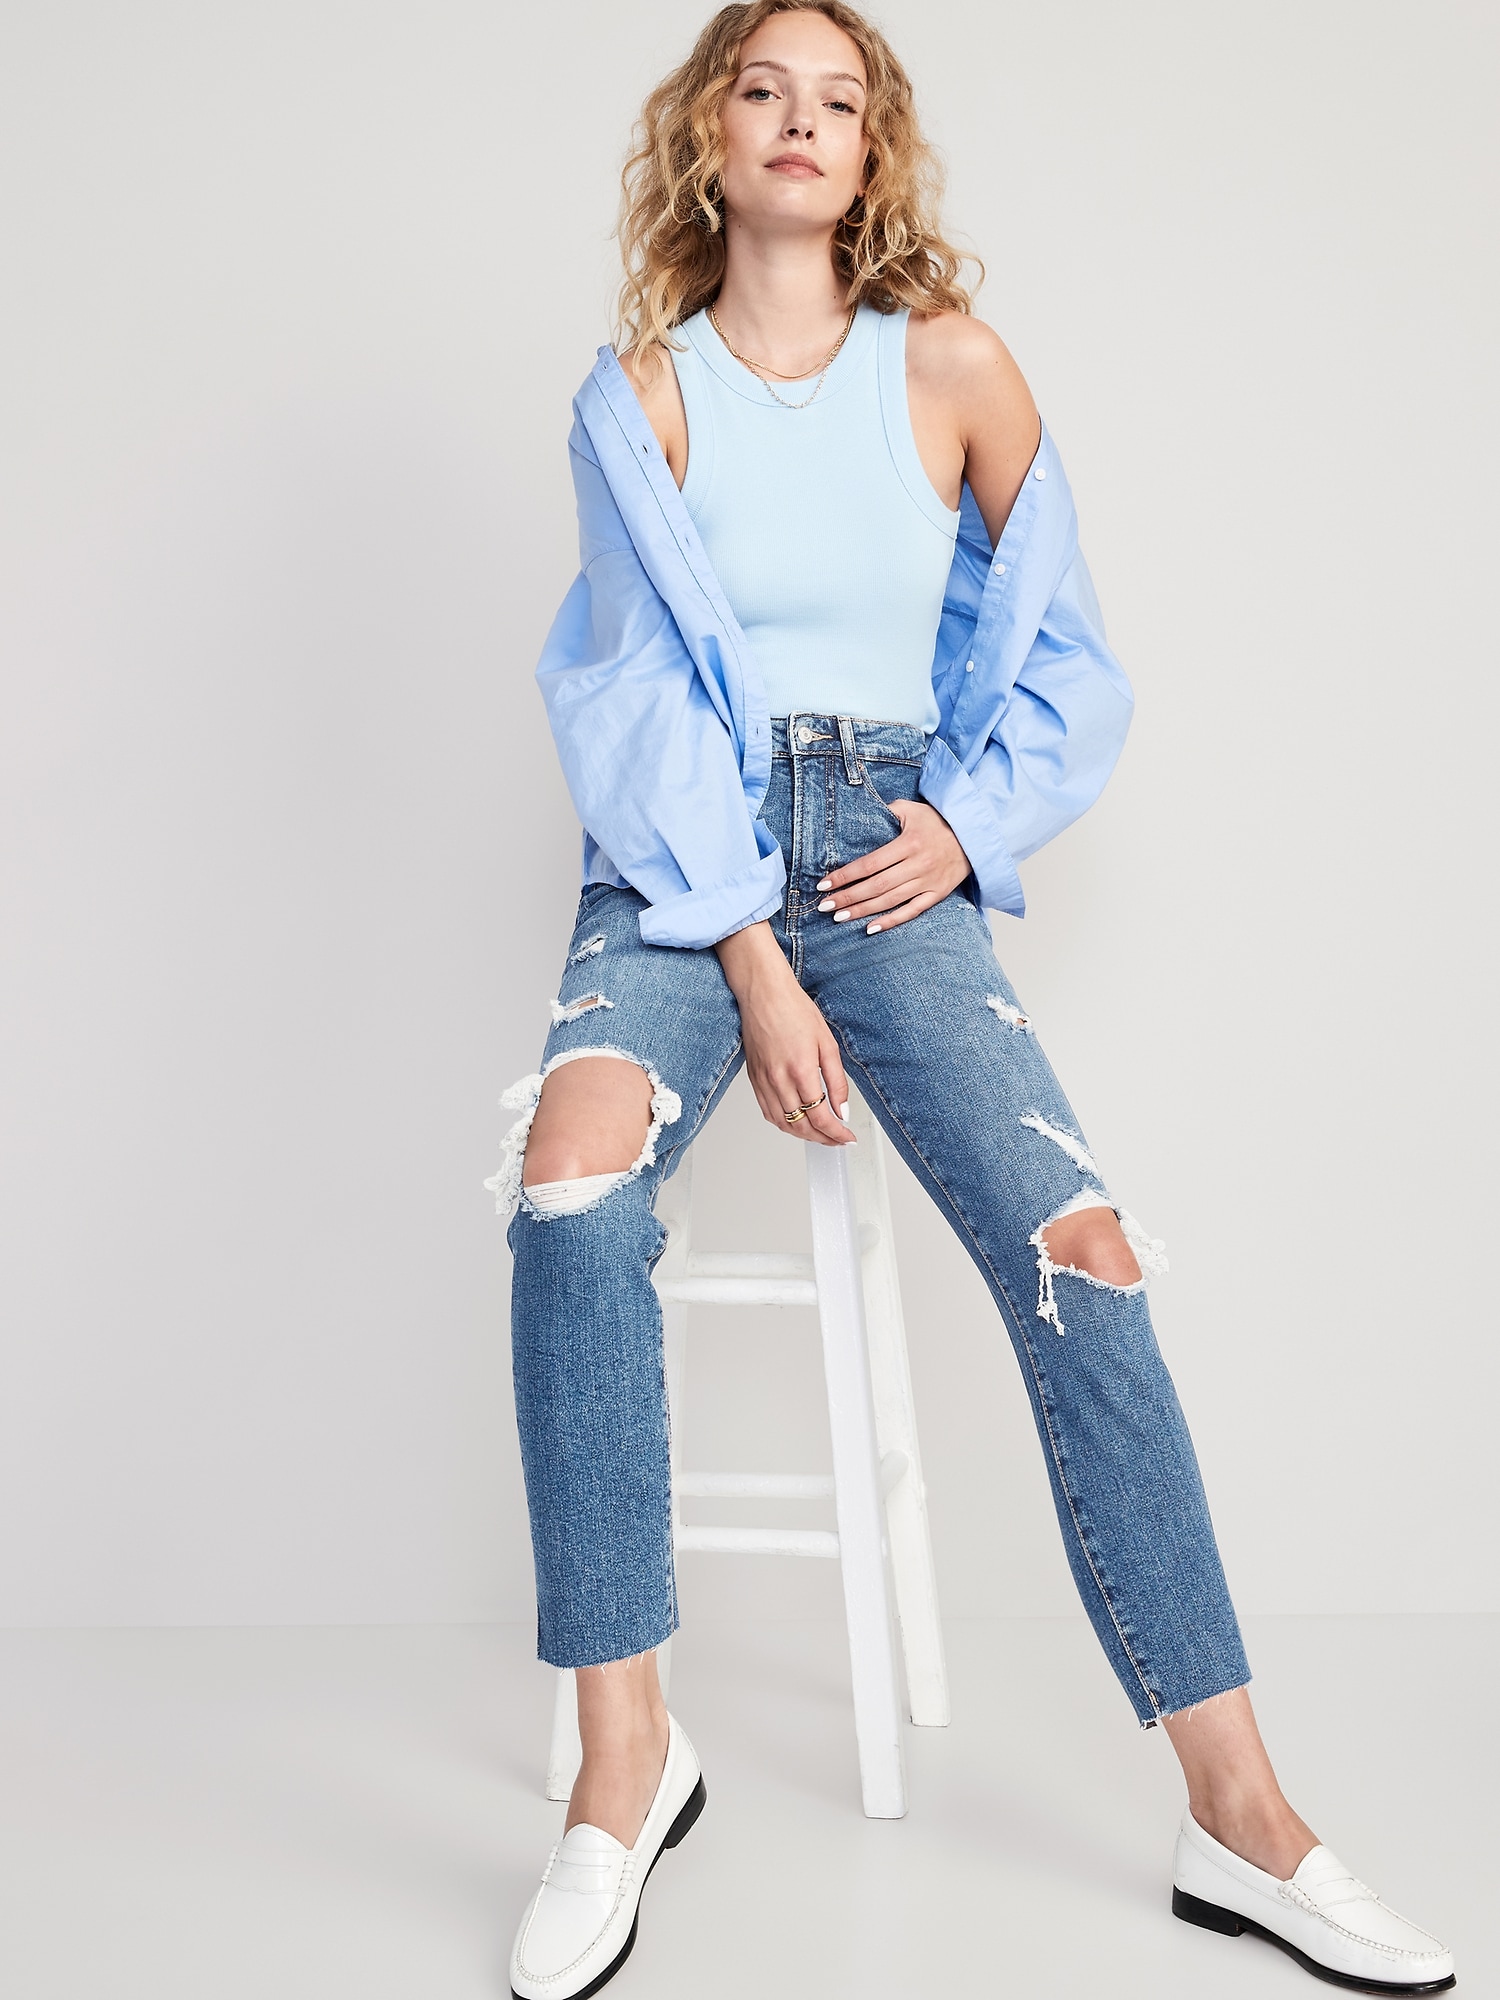 High-Waisted OG Straight Ripped Cut-Off Jeans for Women | Old Navy